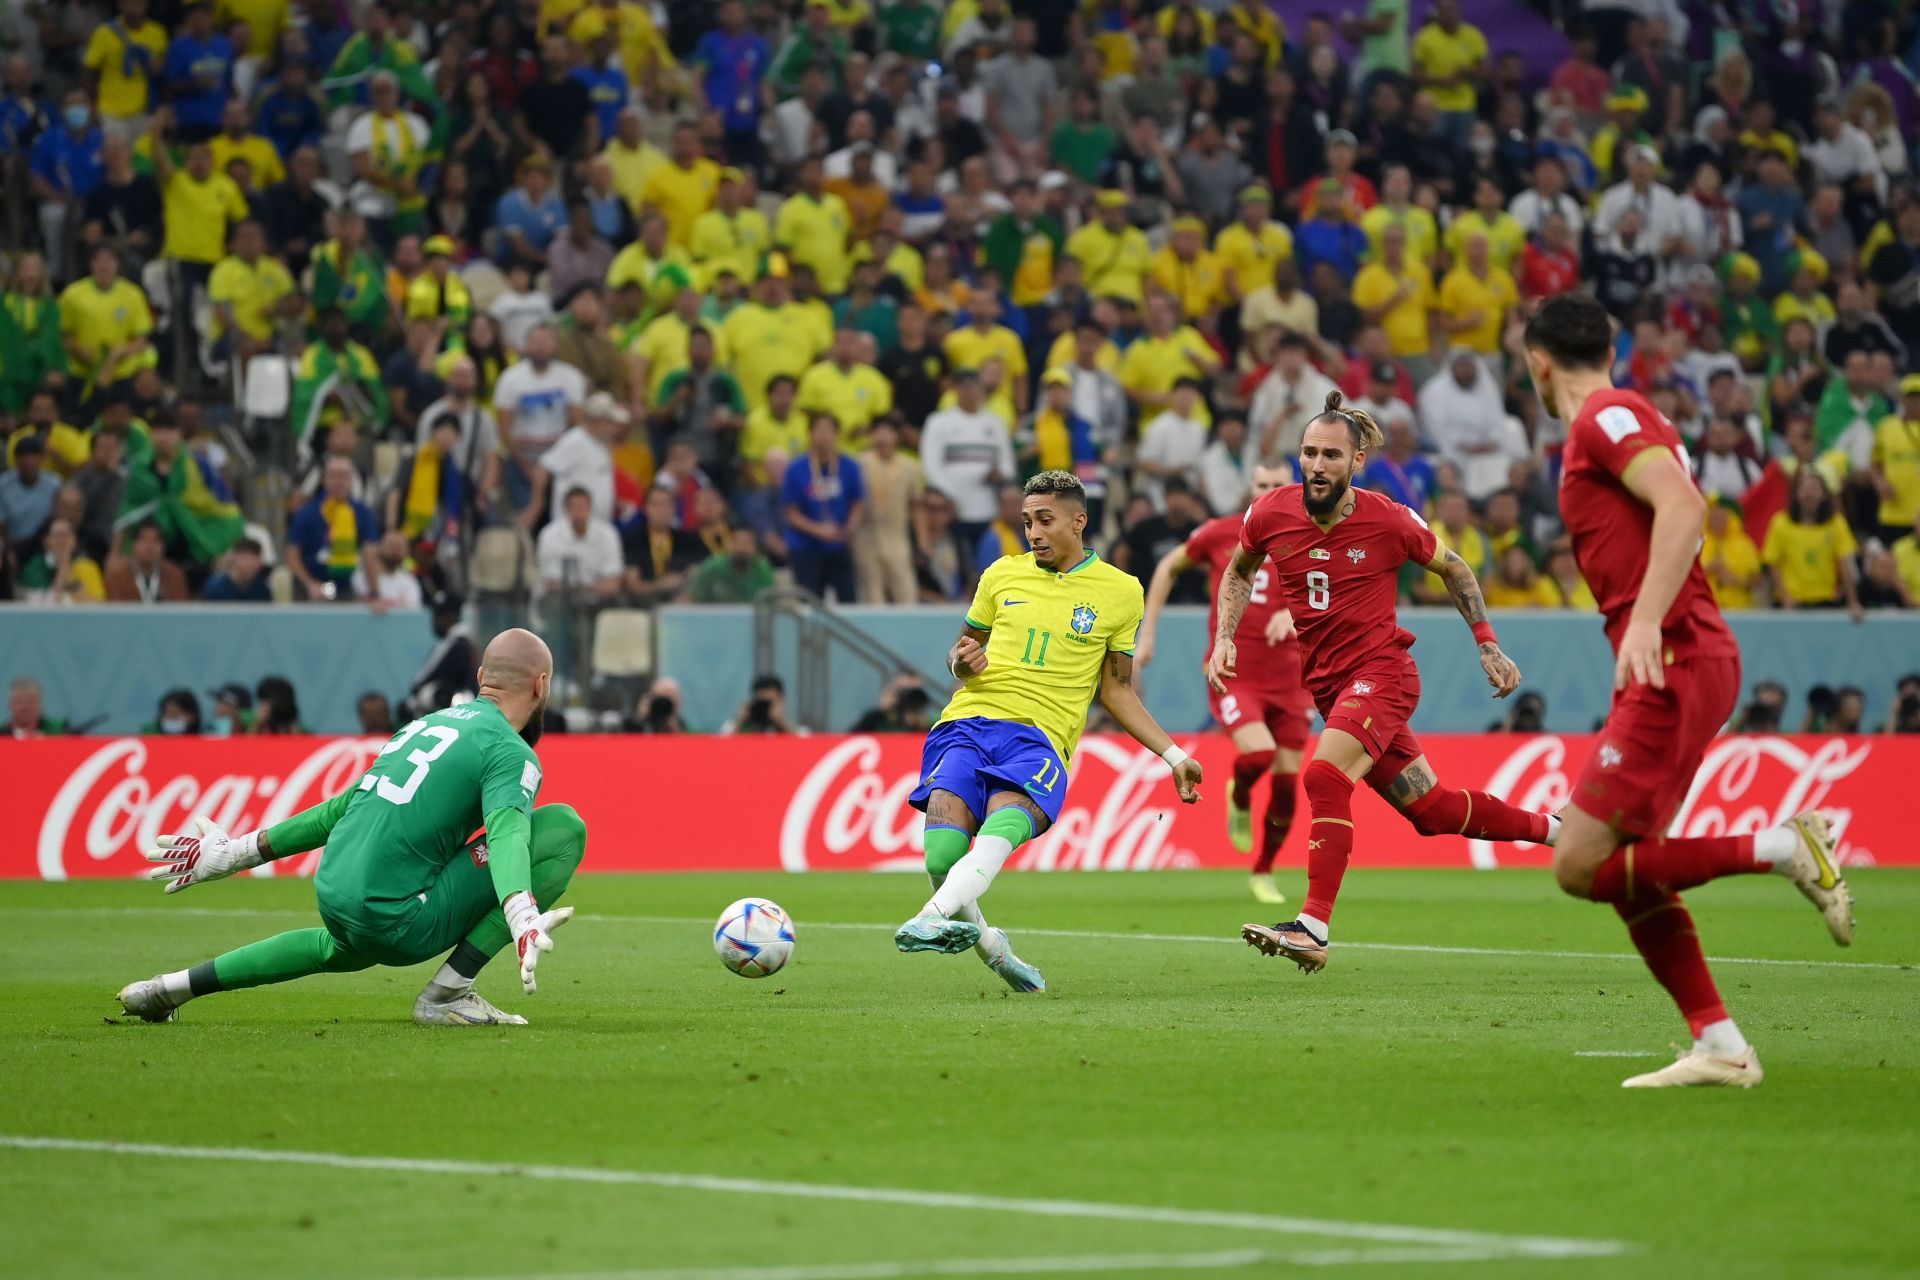 Vanja Milinkovic-Savic made six saves but could not keep Brazil out for too long